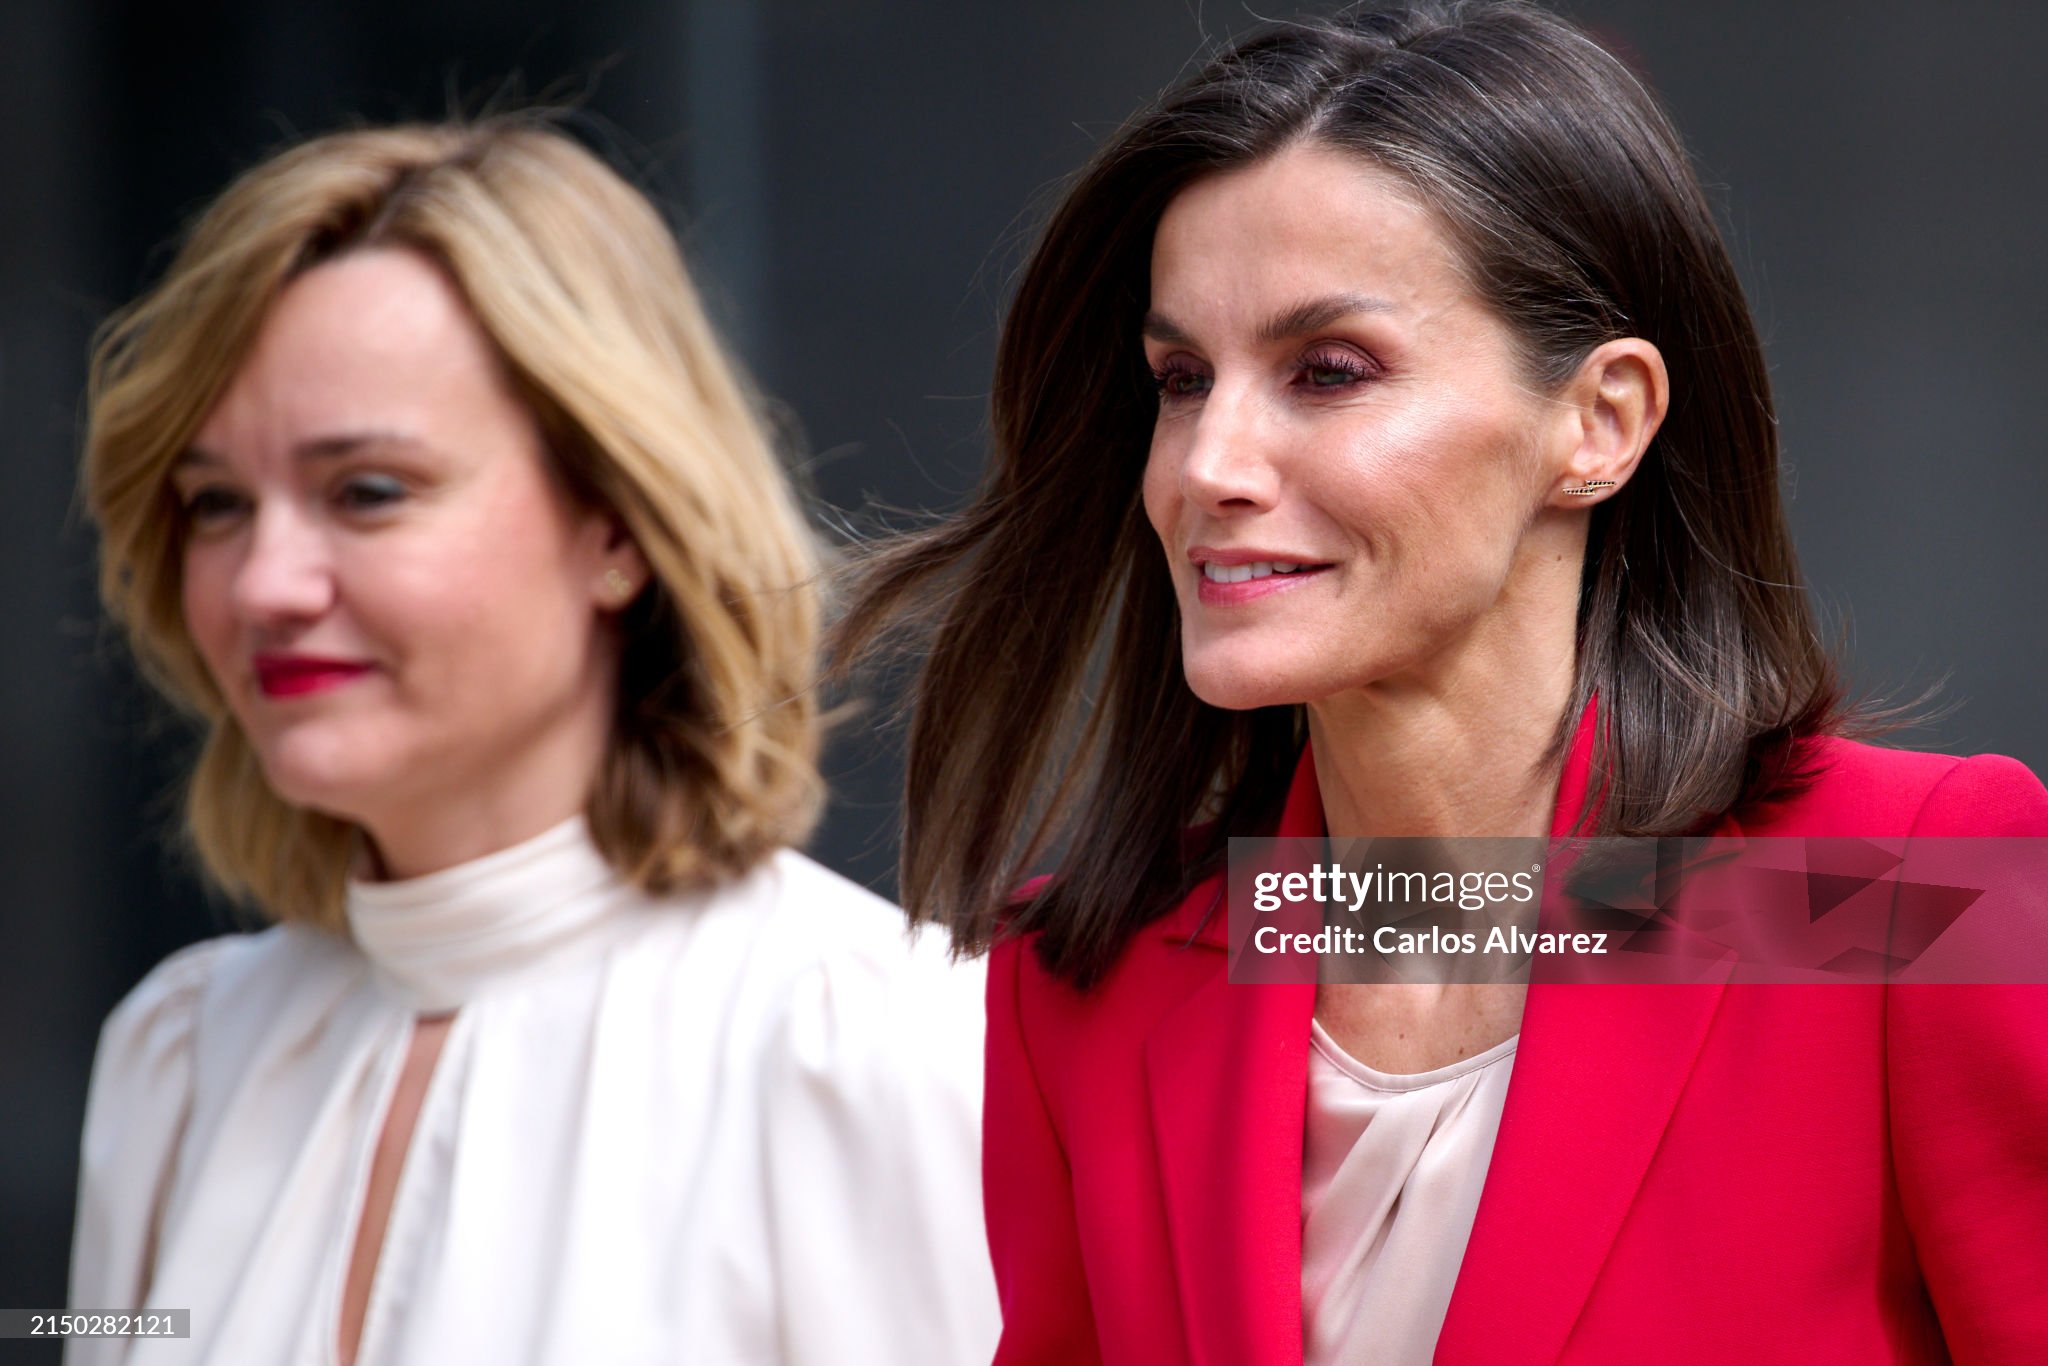 spanish-royals-attend-a-commemorative-act-for-the-spanish-participation-in-the-olympic-games.jpg?s=2048x2048&w=gi&k=20&c=YwLQ7tP3ynoiRAnCAWLJyhk1wSsadubnEOMAhHOjYpM=